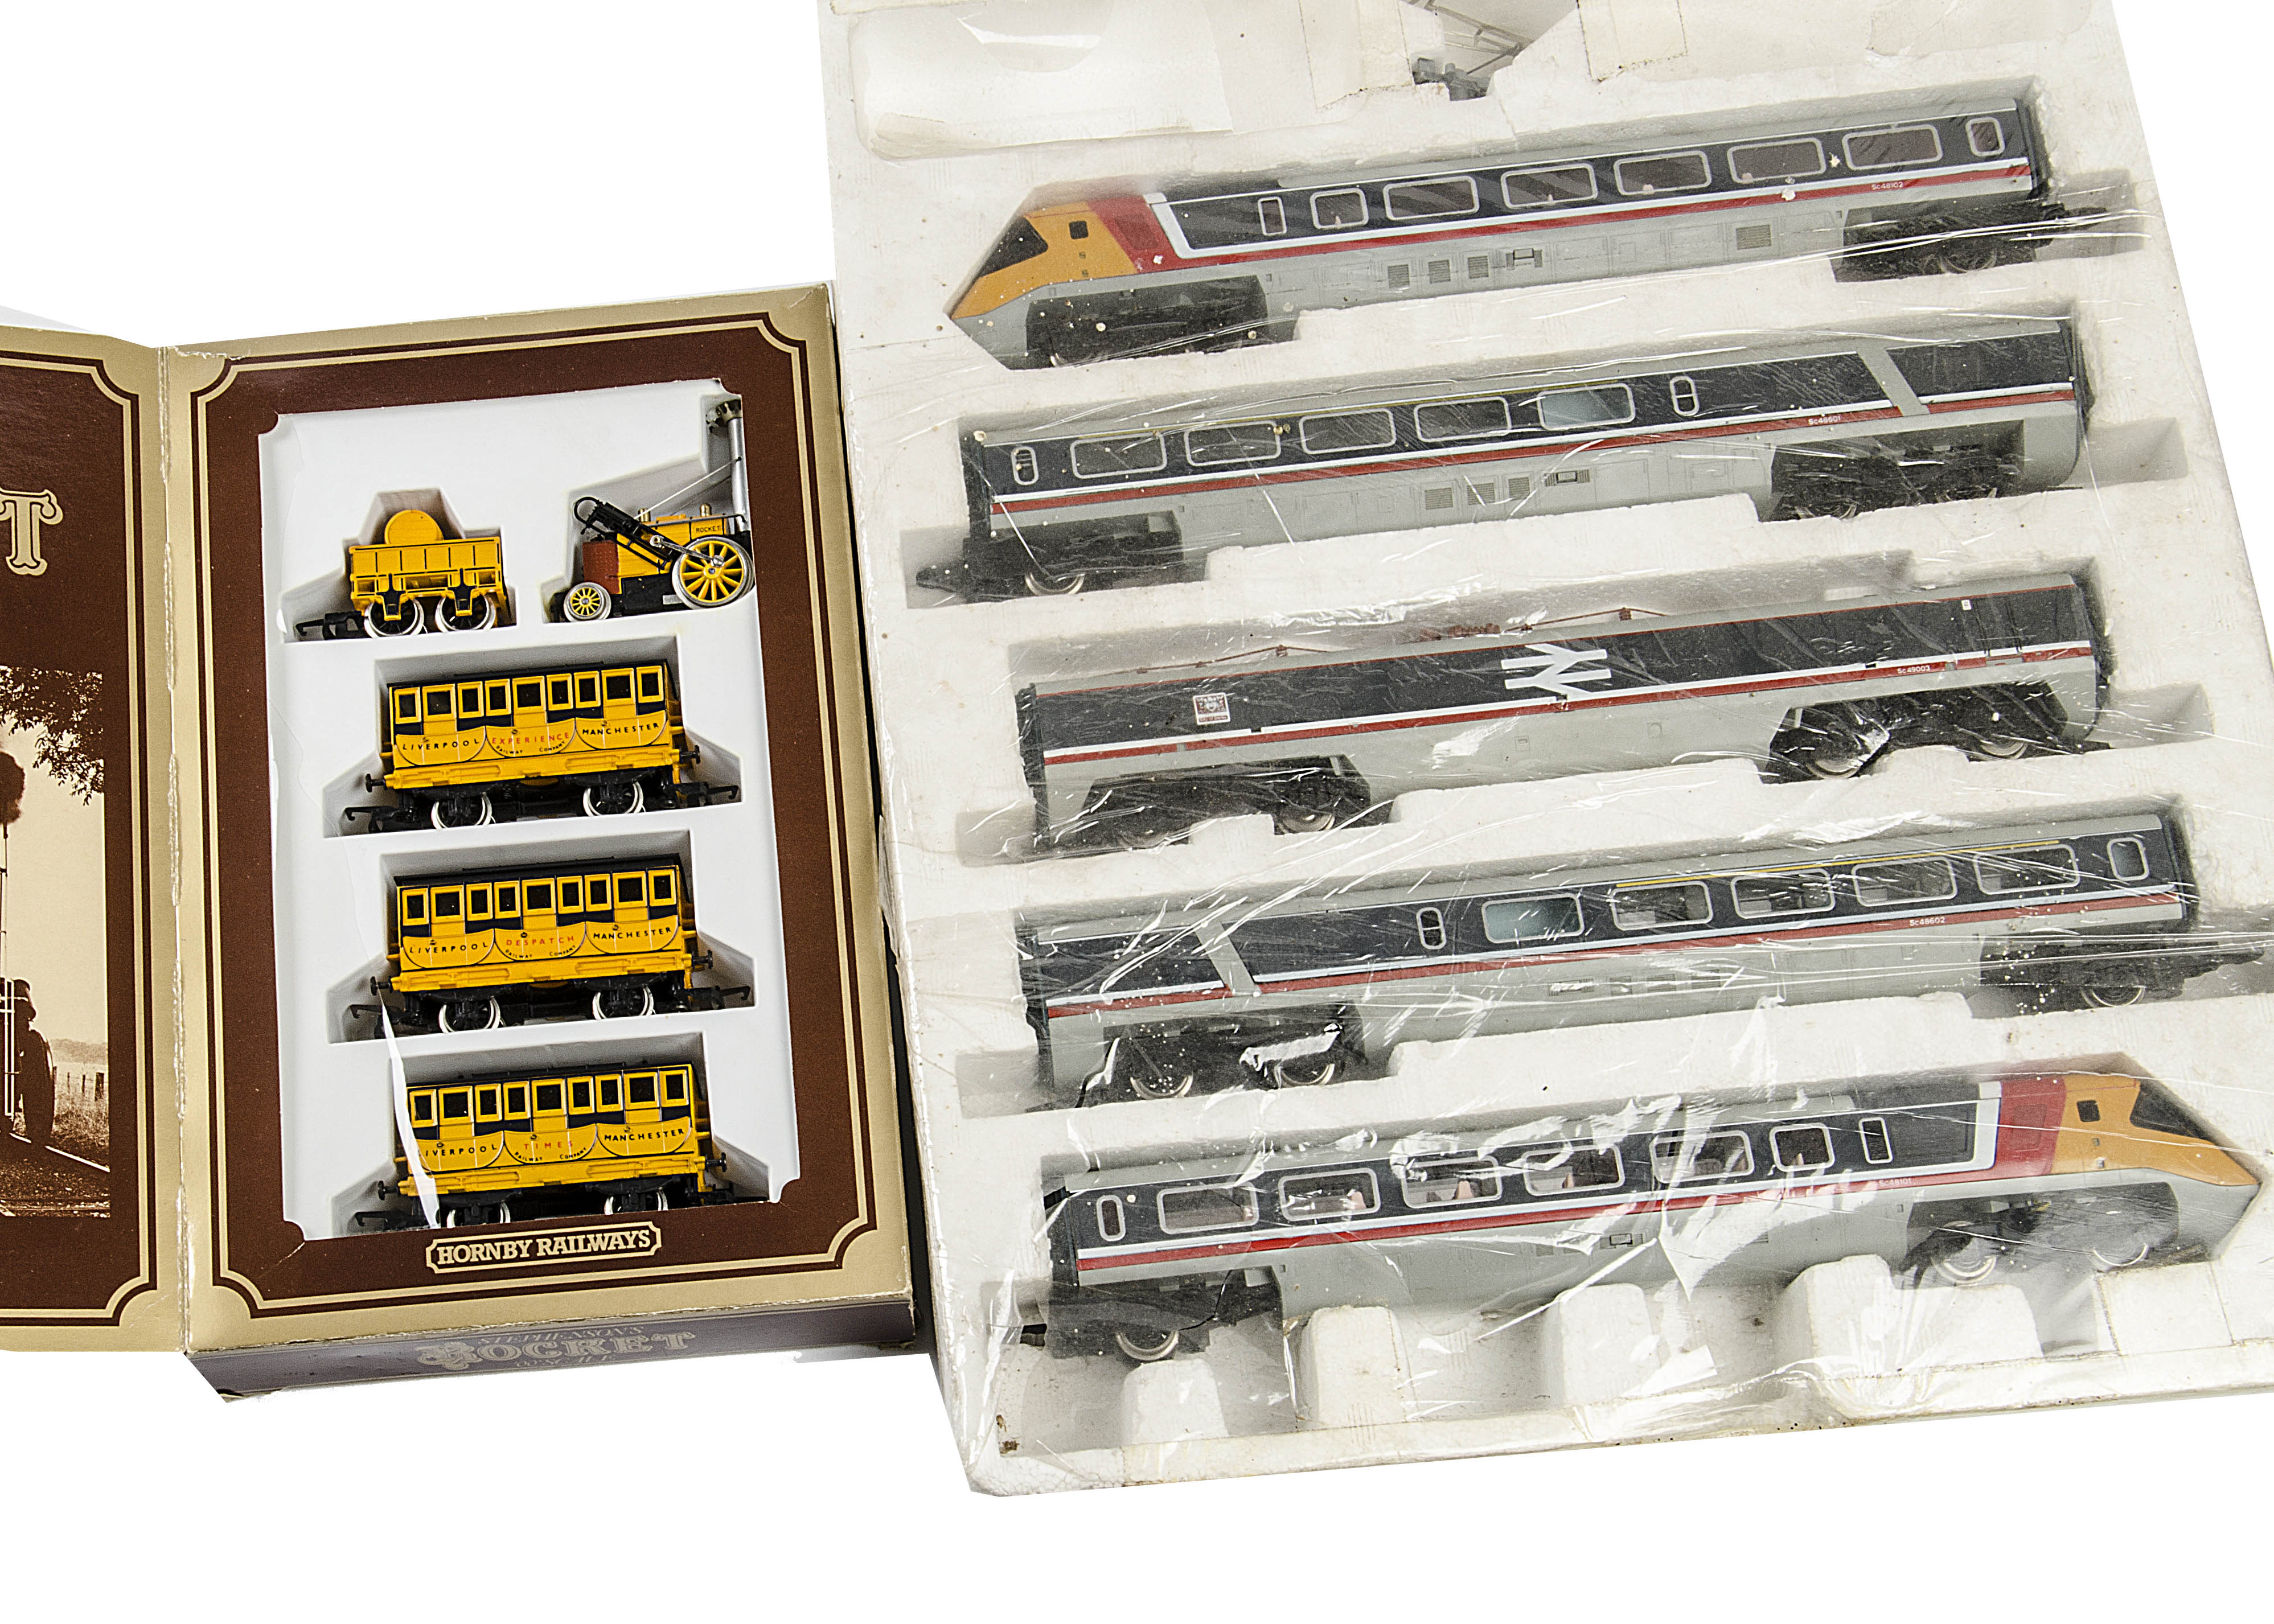 A Hornby 00 Gauge 'Stephenson's Rocket' Train Pack and Advanced Passenger Train Pack: Ancient and